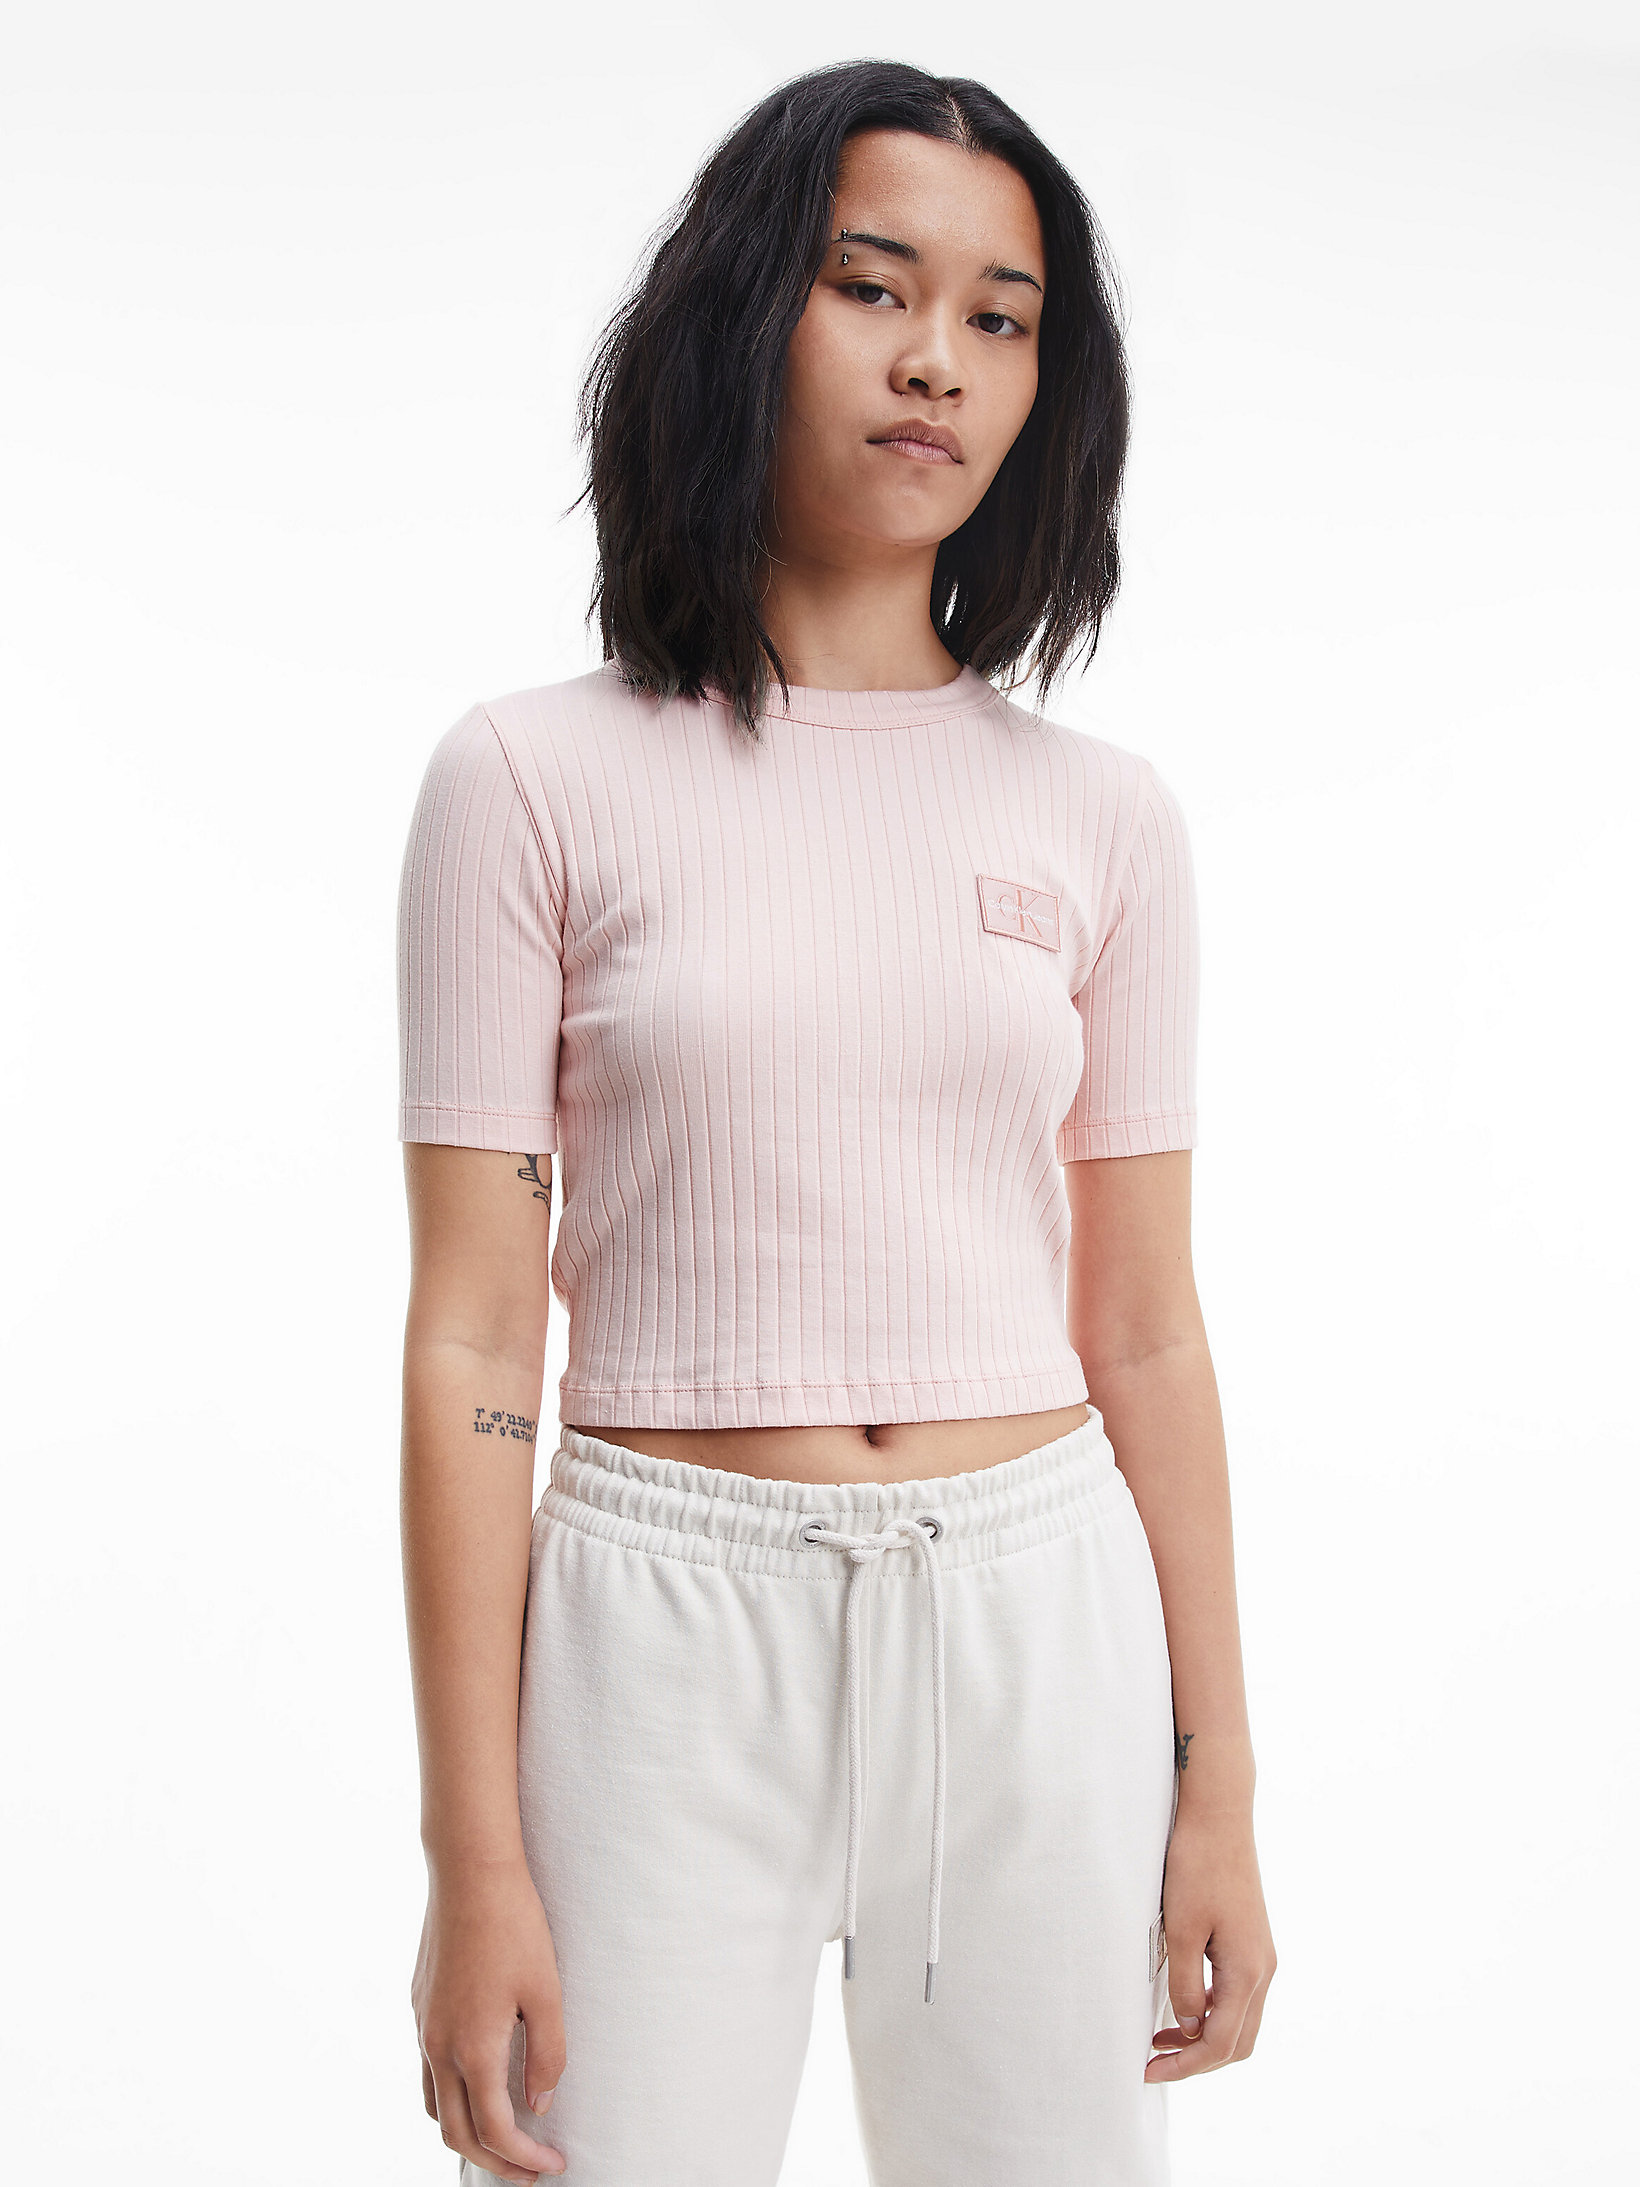 Camiseta Cropped Slim Con Insignia > Pink Blush > undefined mujer > Calvin Klein